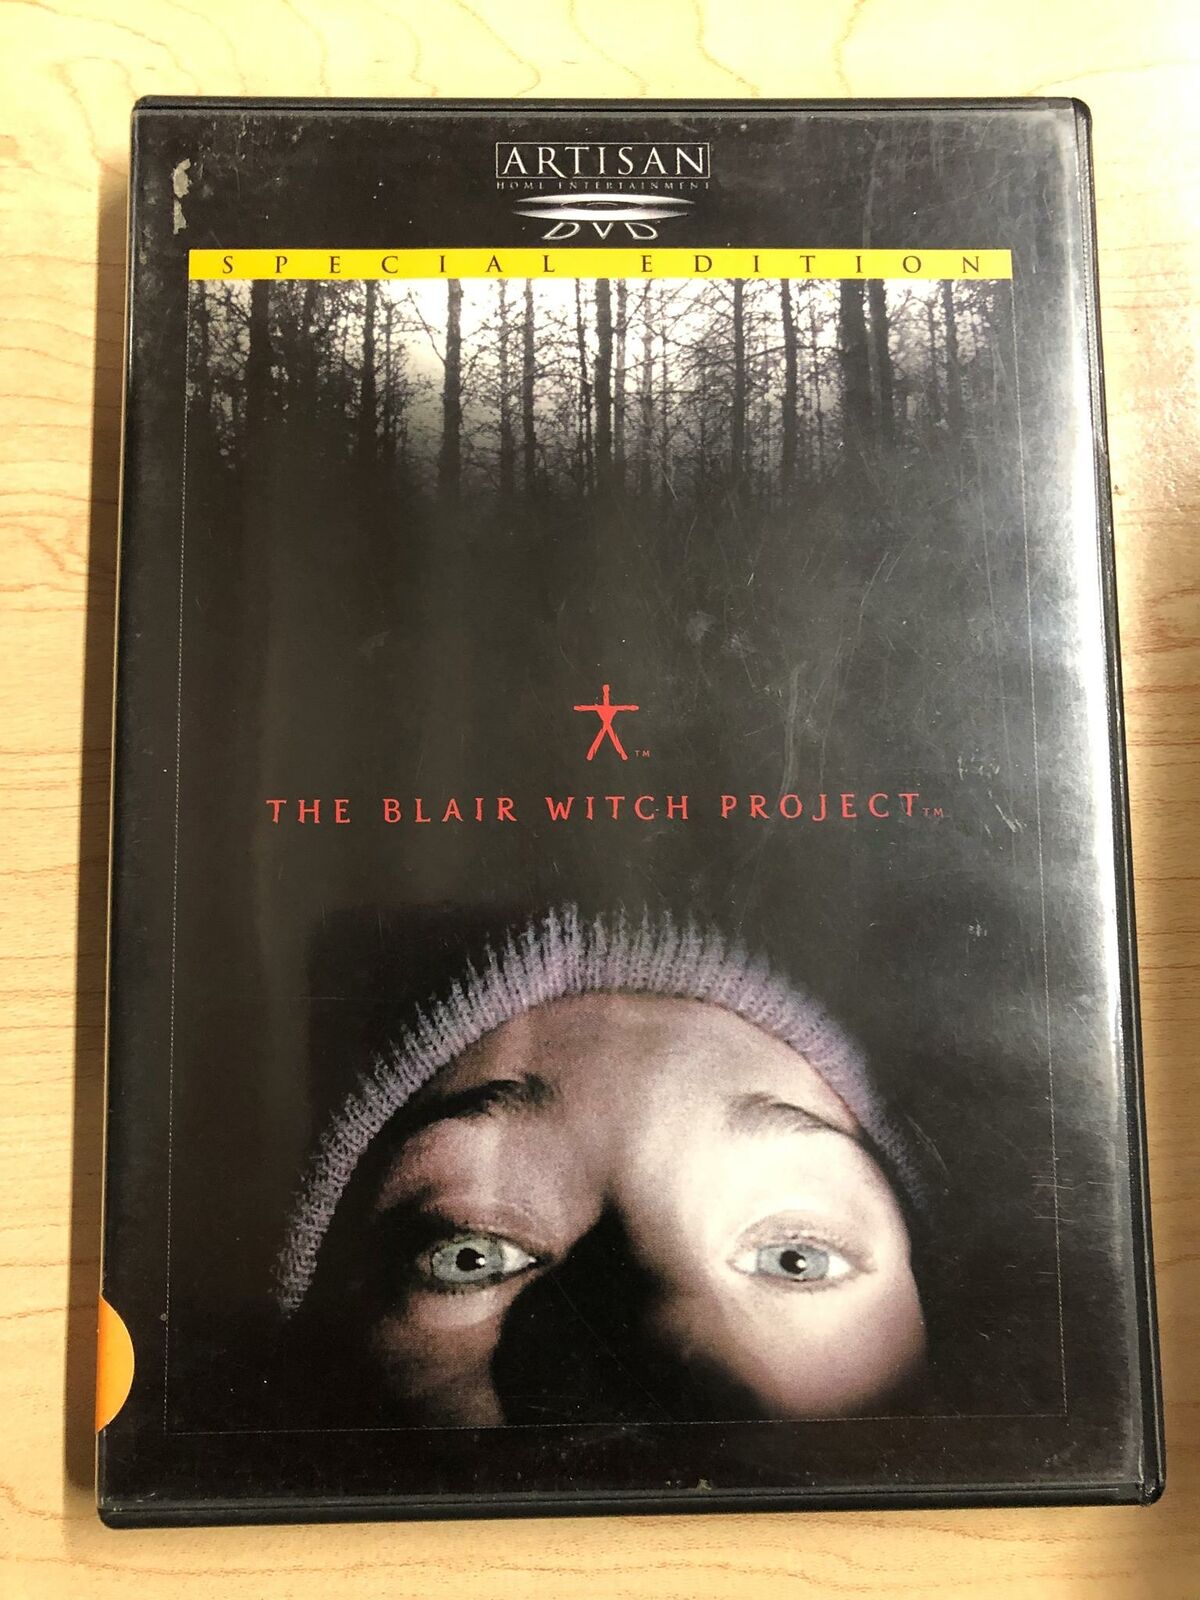 The Blair Witch Project (DVD, 1999, Special Edition) - J0917